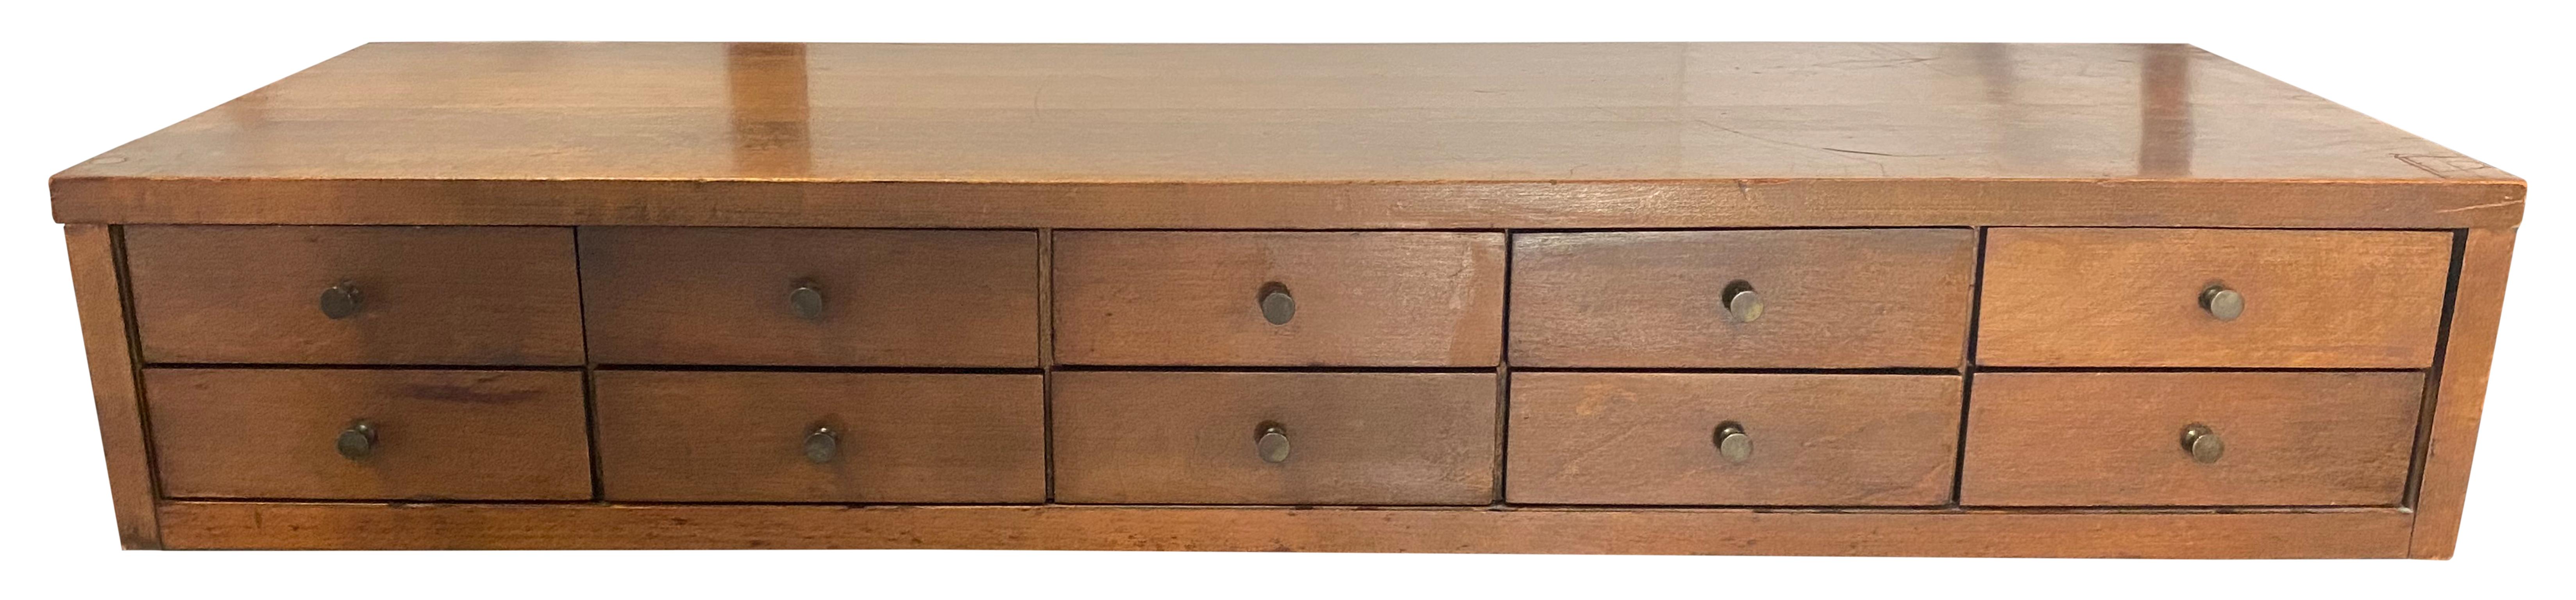 Rare Paul McCobb #1502 3' small chest of drawers in solid maple construction with walnut finish. Very high quality construction with original brass pulls black coated. Made for top of dresser or bookcase. 10 brass knobs 10 individual drawers.